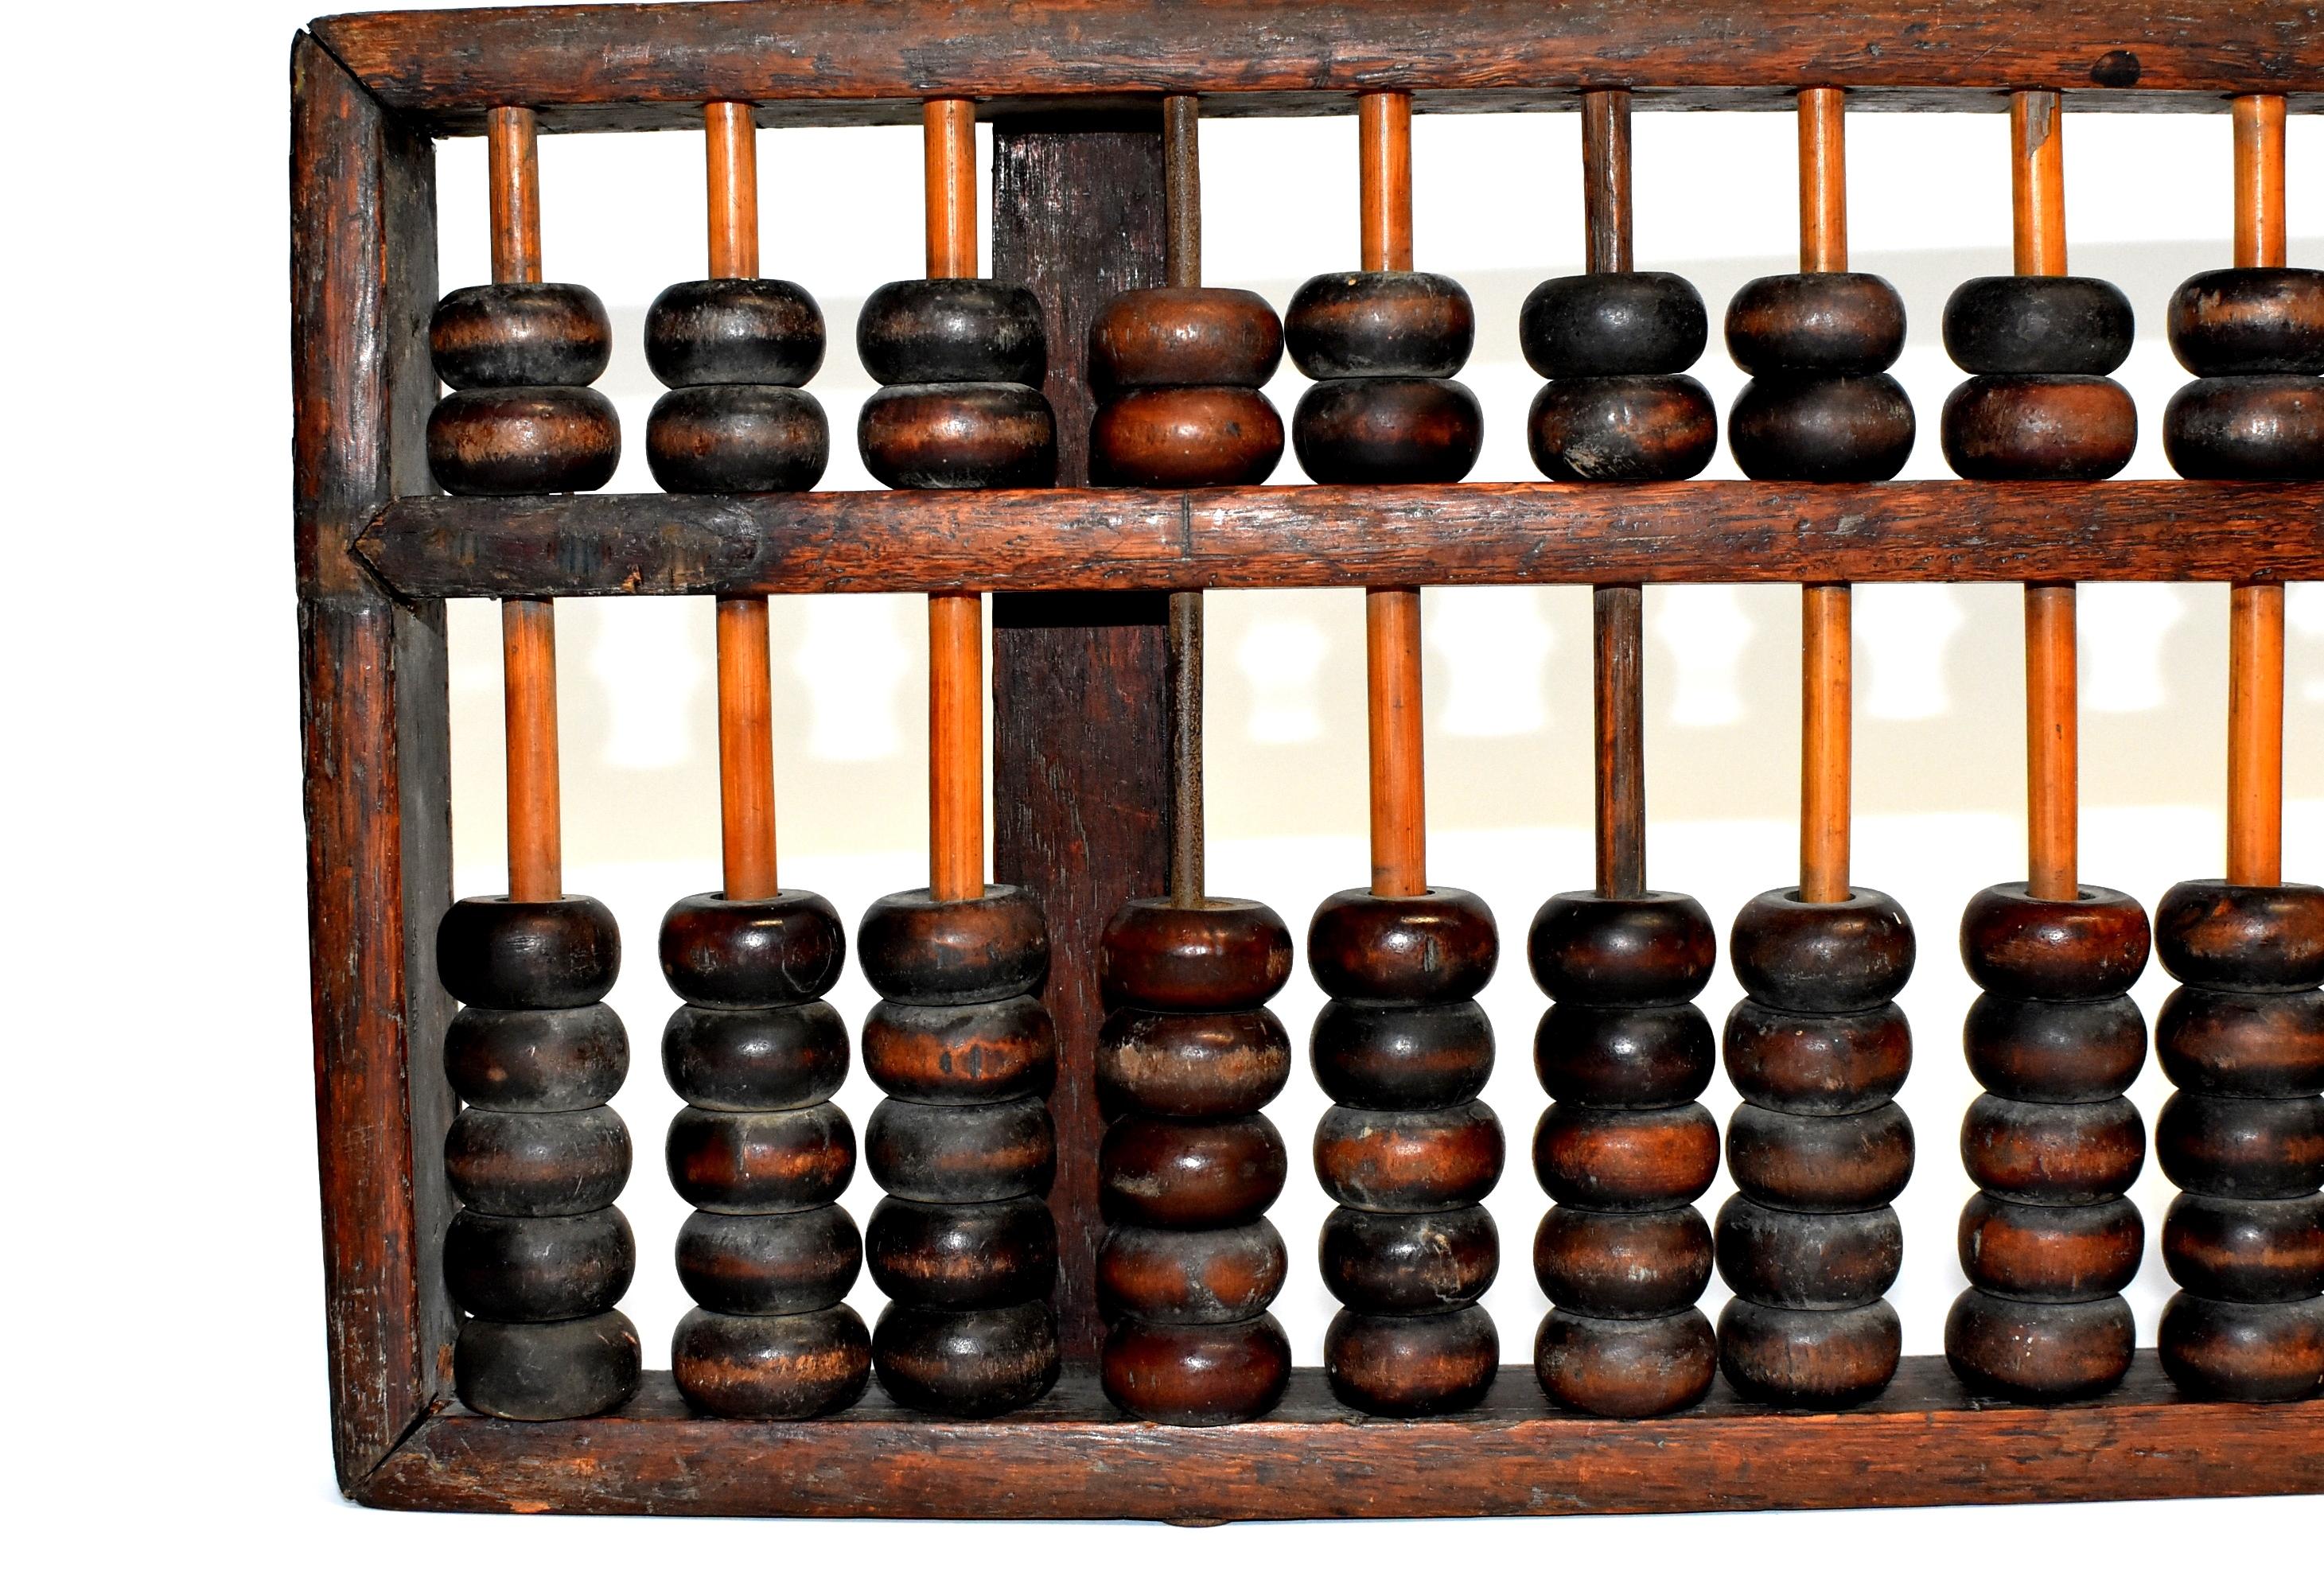 This is an authentic Chinese abacus that was used in the early 20th century. The Abacus being an ingenious calculator has been used in China for over a thousand years. Its accuracy and speed remains extraordinarily impressive till this day of age.